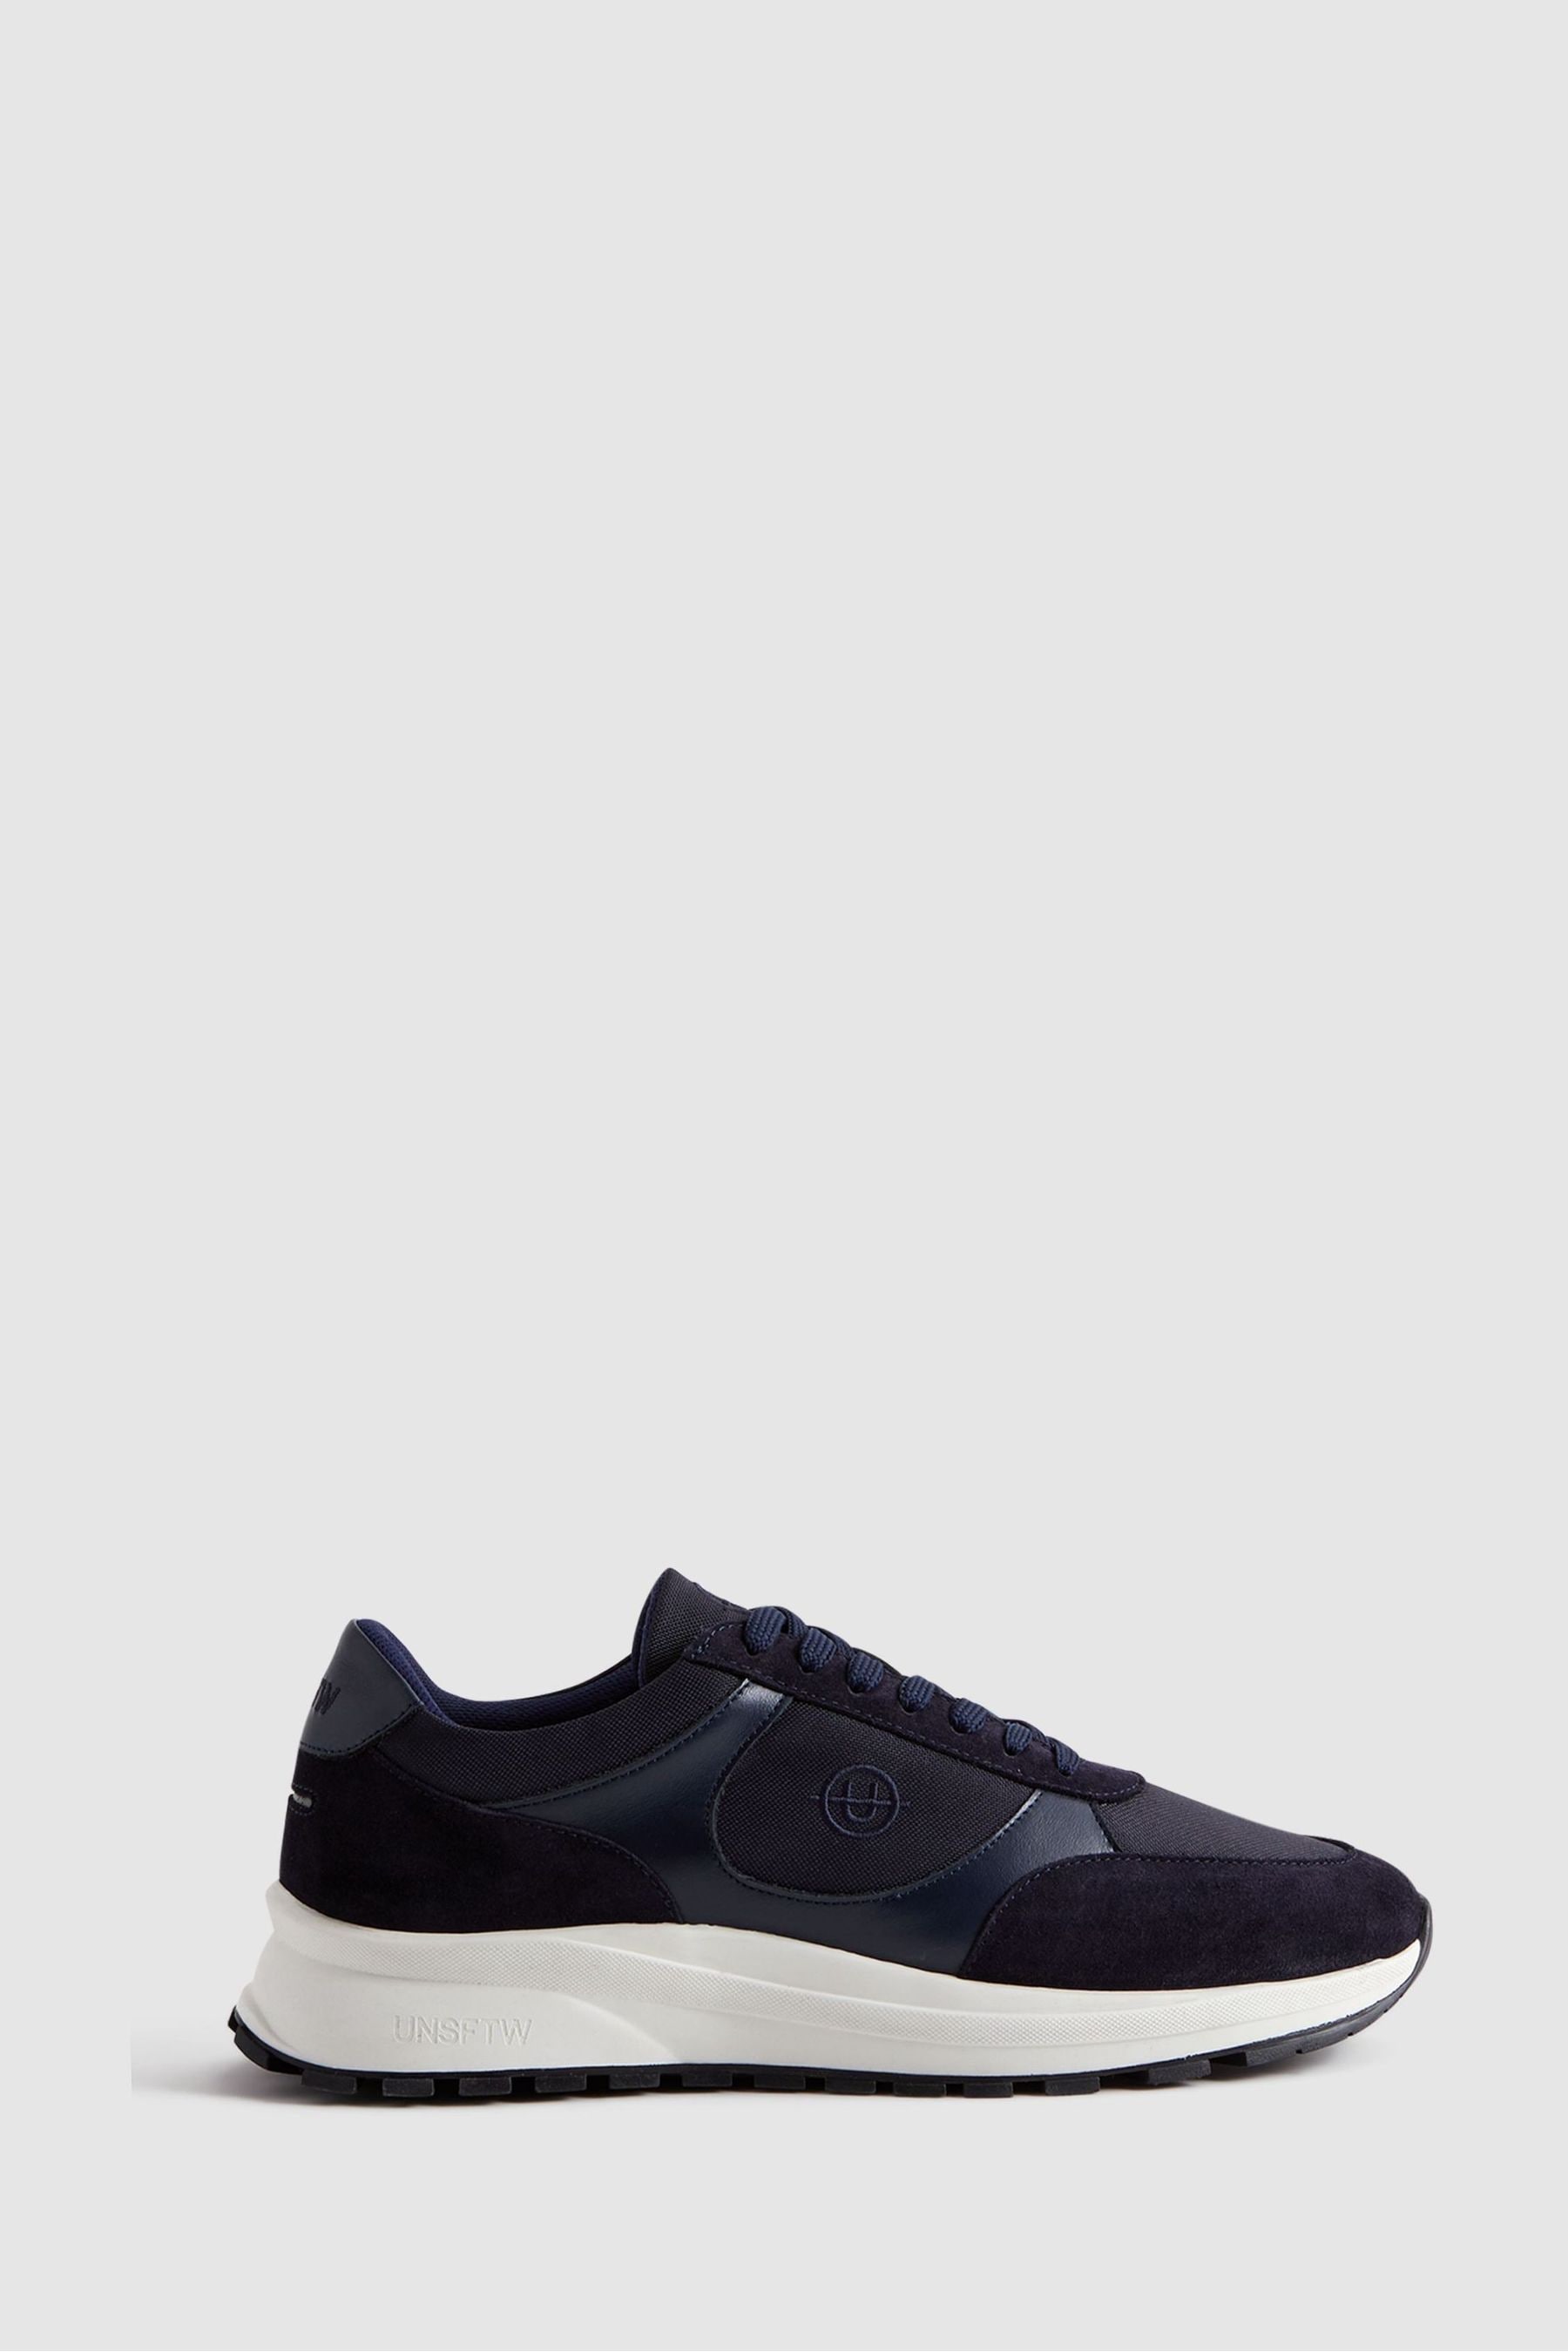 Unseen Plemont Trainers In Navy/white